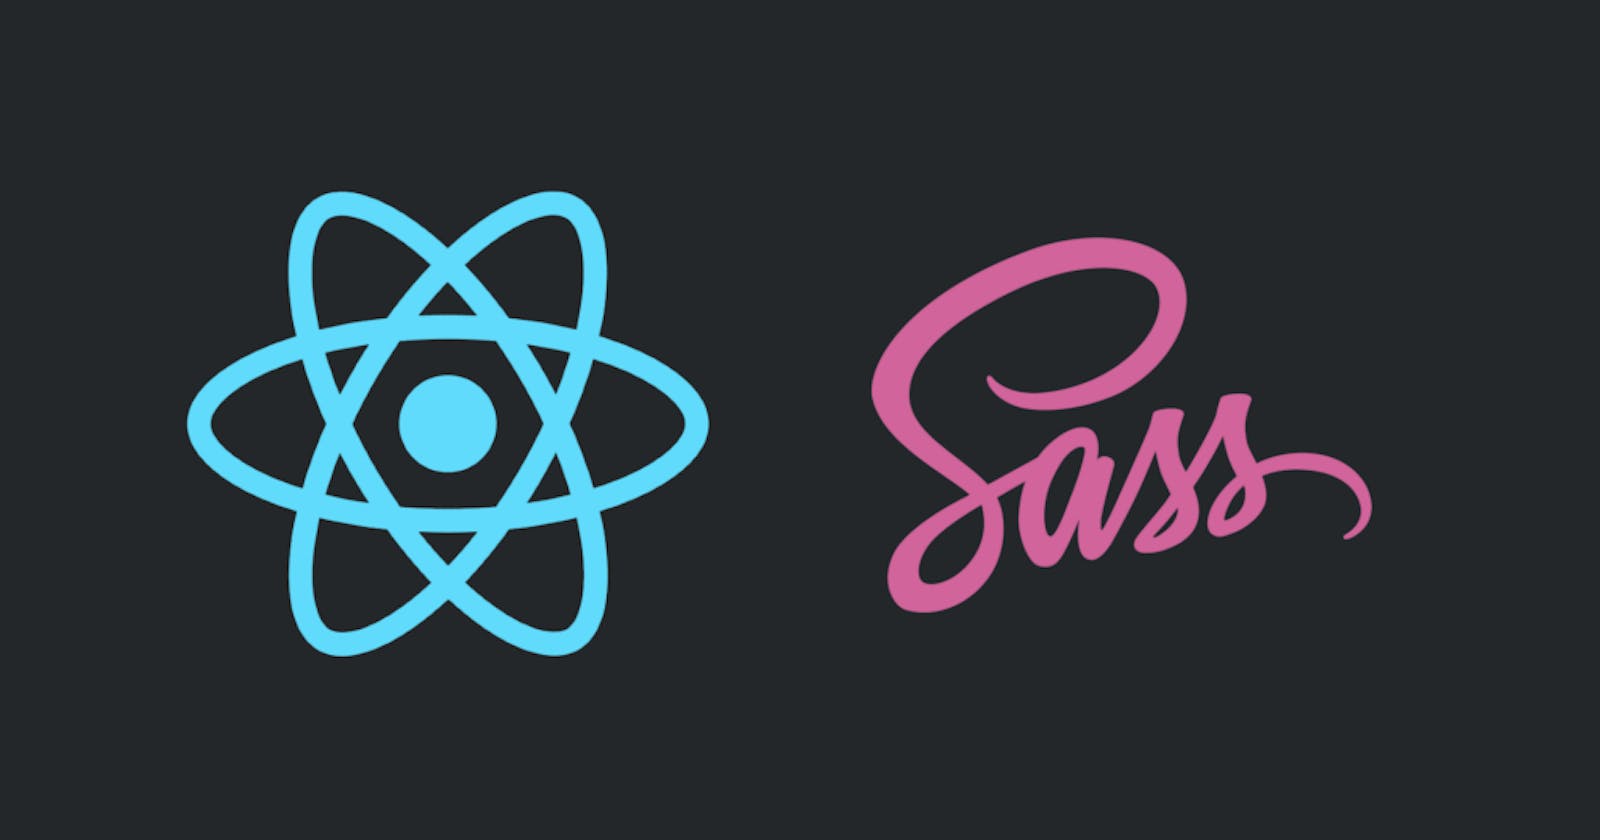 Using Sass in a create-react-app Application